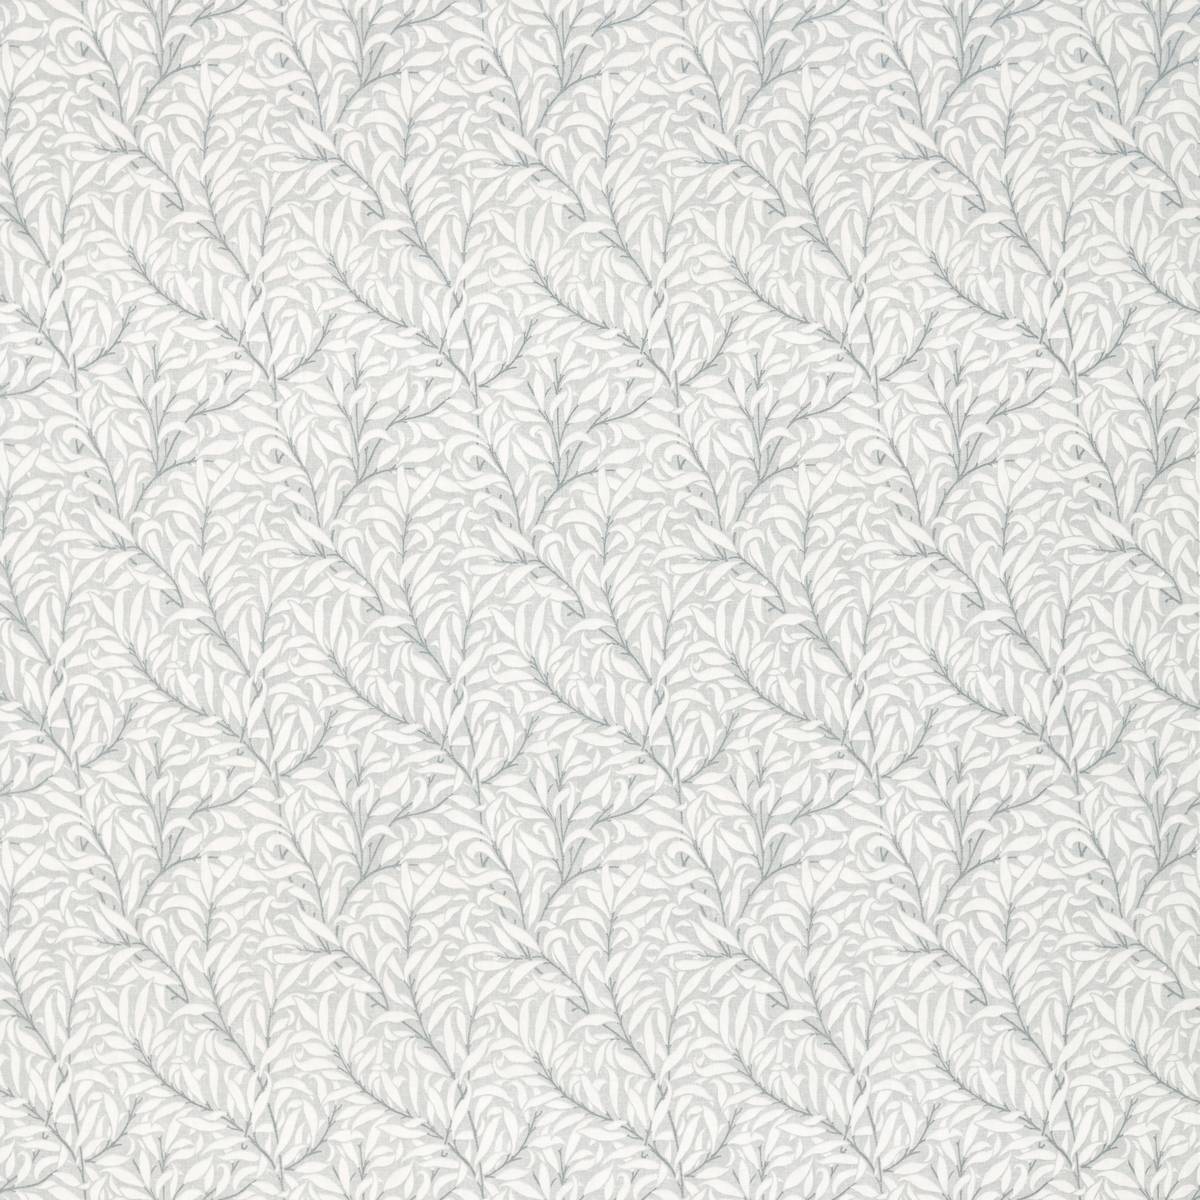 Pure Willow Boughs Print Lightish Grey Fabric by William Morris & Co.